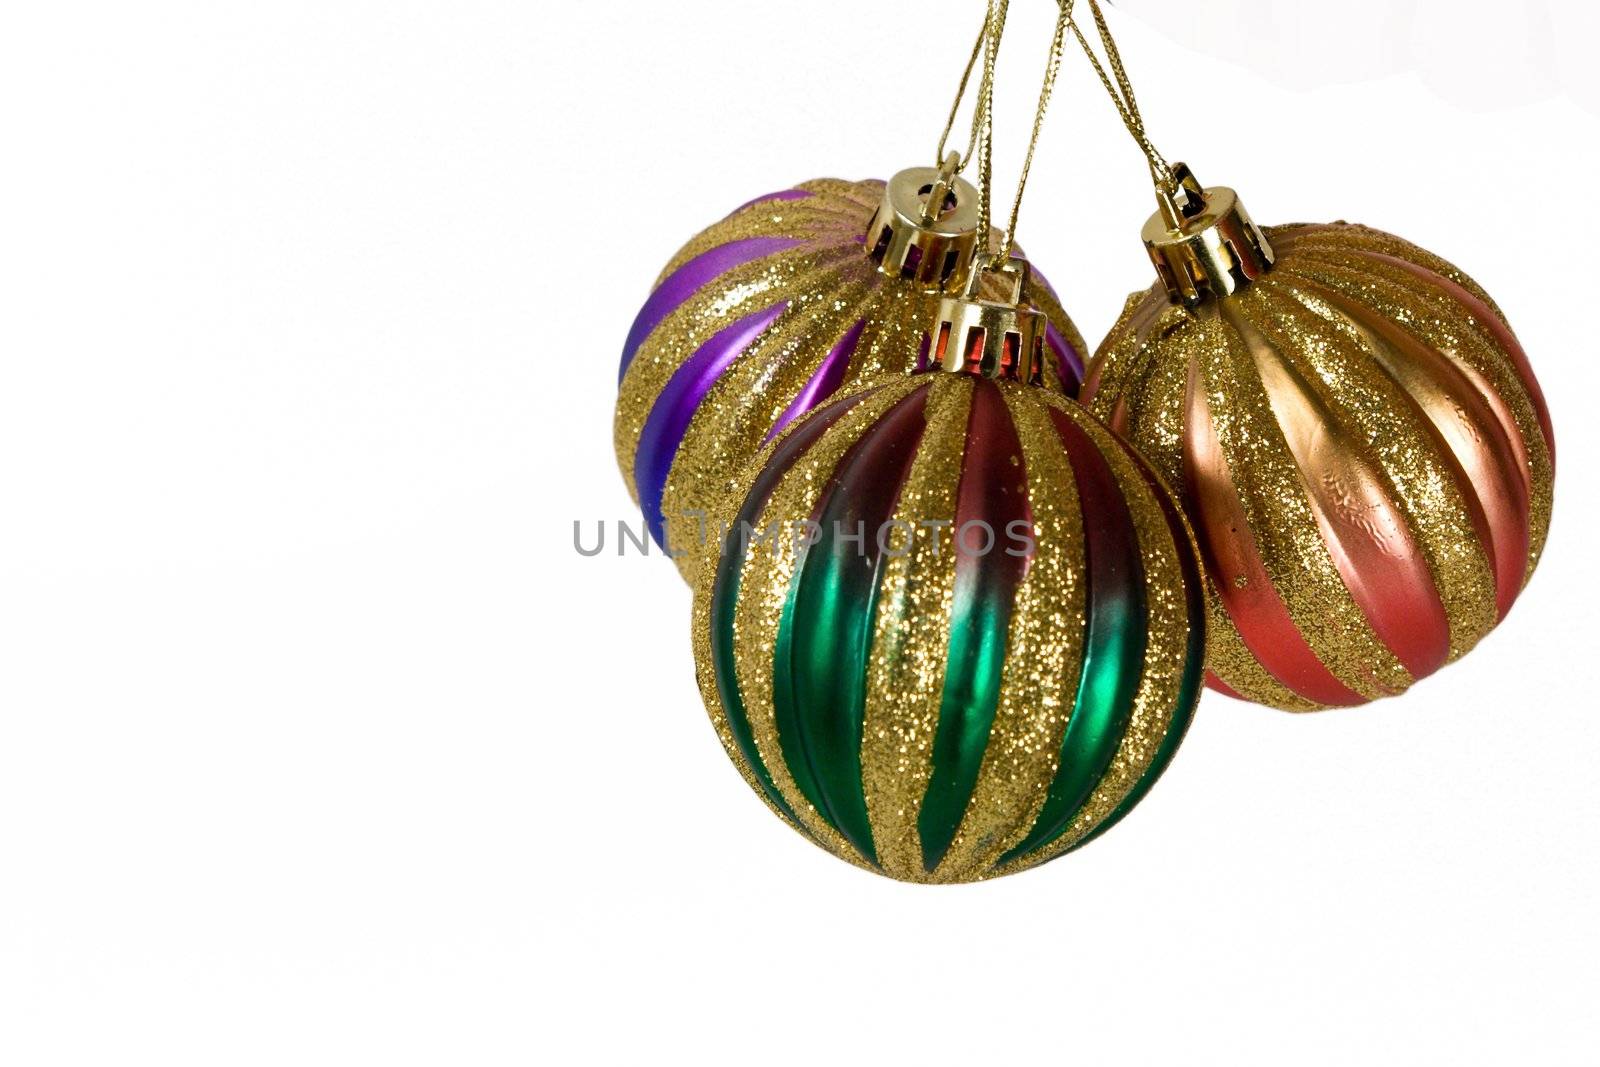 Three hanging spheres on a white background by ISerg